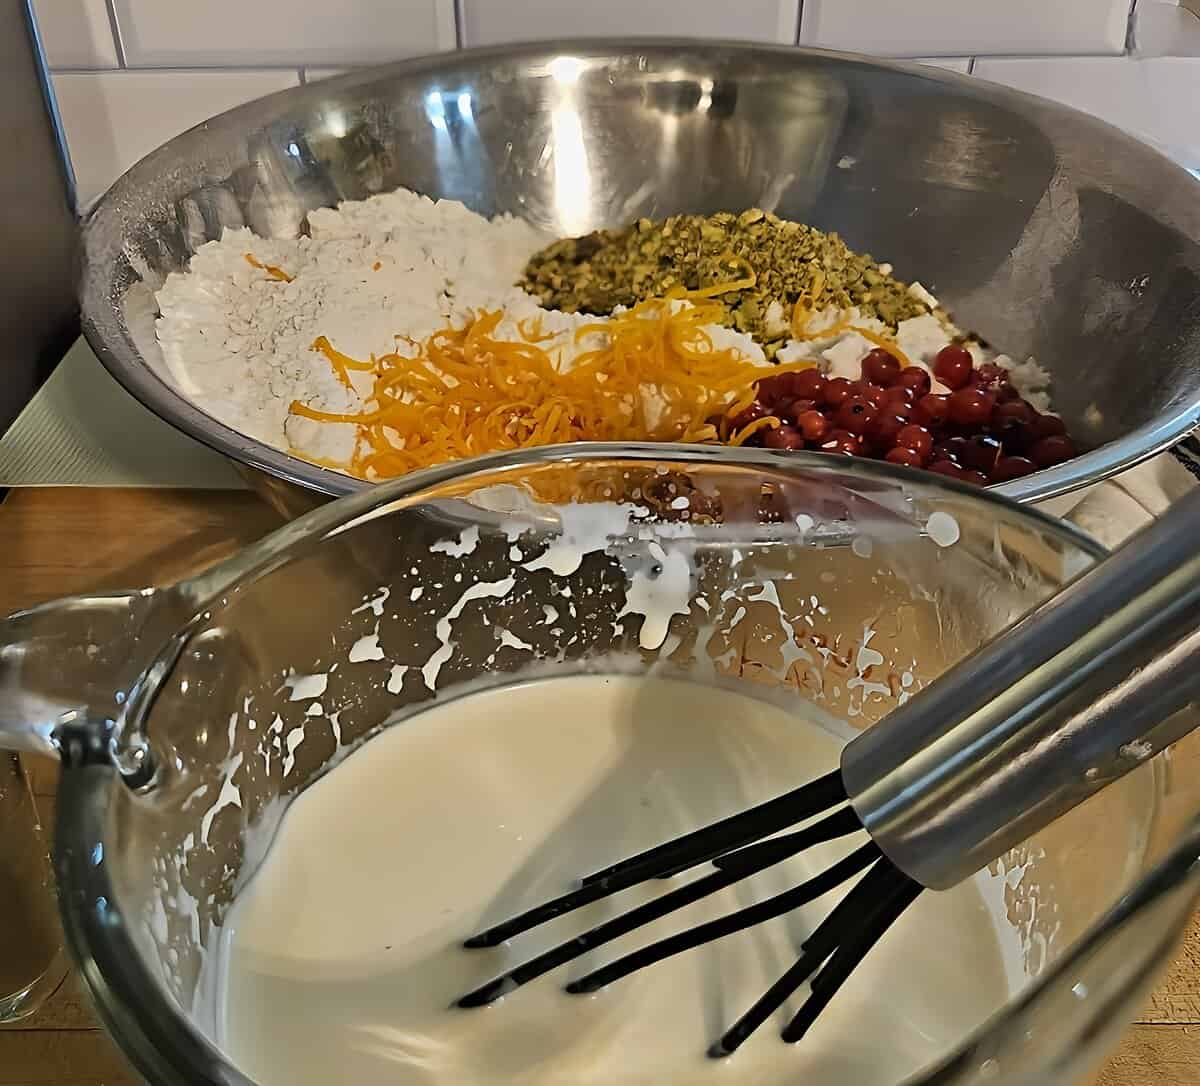 dry and wet ingredients for scone dough shown separately. half and half in measuring cup with a whip in it, flour with butter cut into it with currants, orange zest, and pistachios resting on top in a mixing bowl